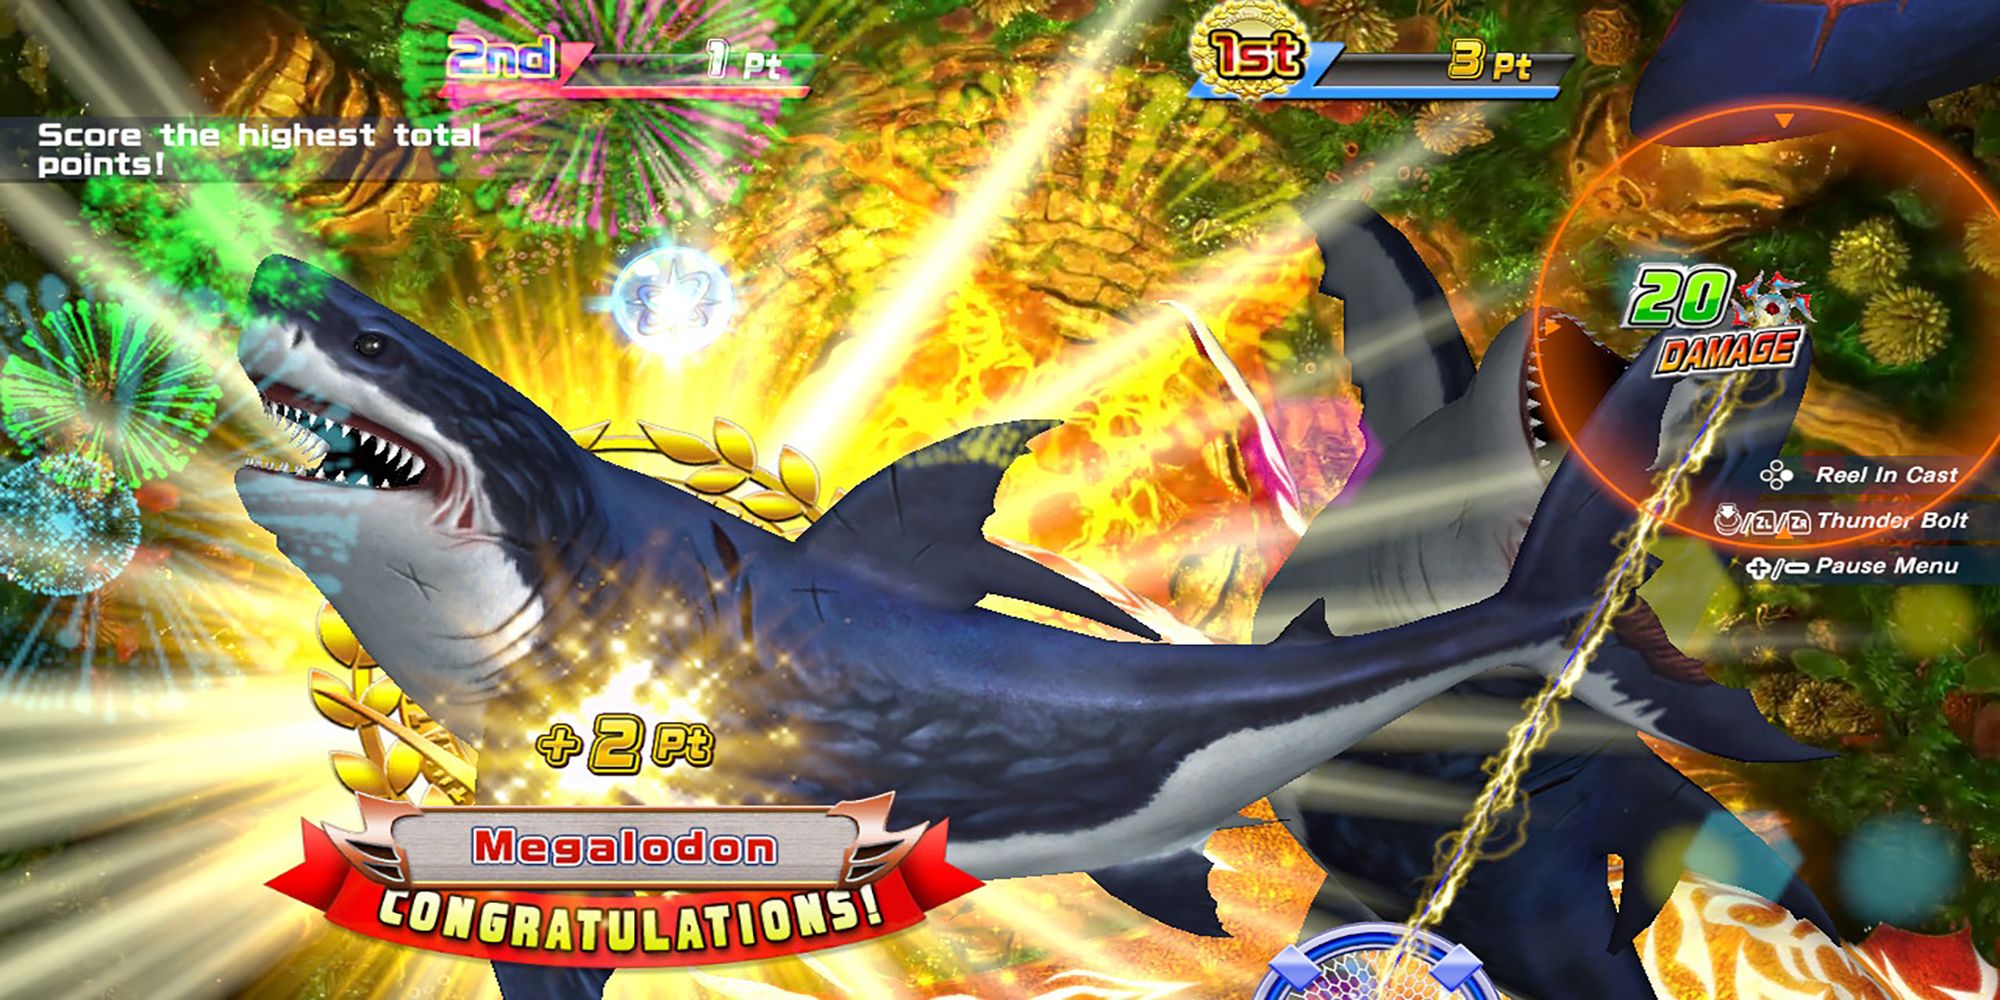 Player One catches a Megalodon during a Big Game Rush competition in Ace Angler: Fishing Spirits.